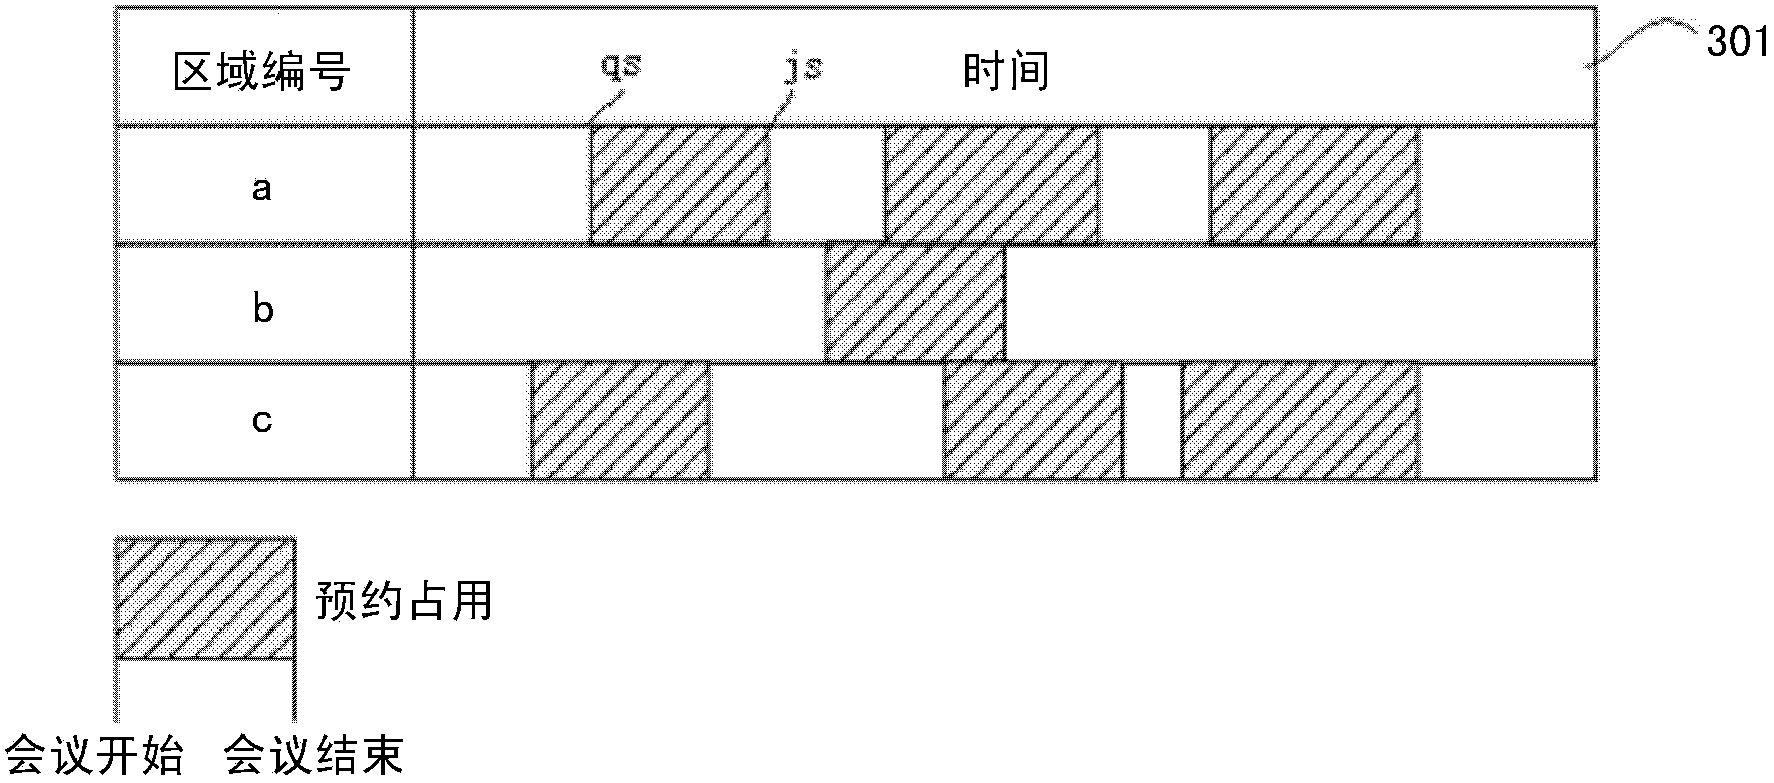 Air conditioner control device and method